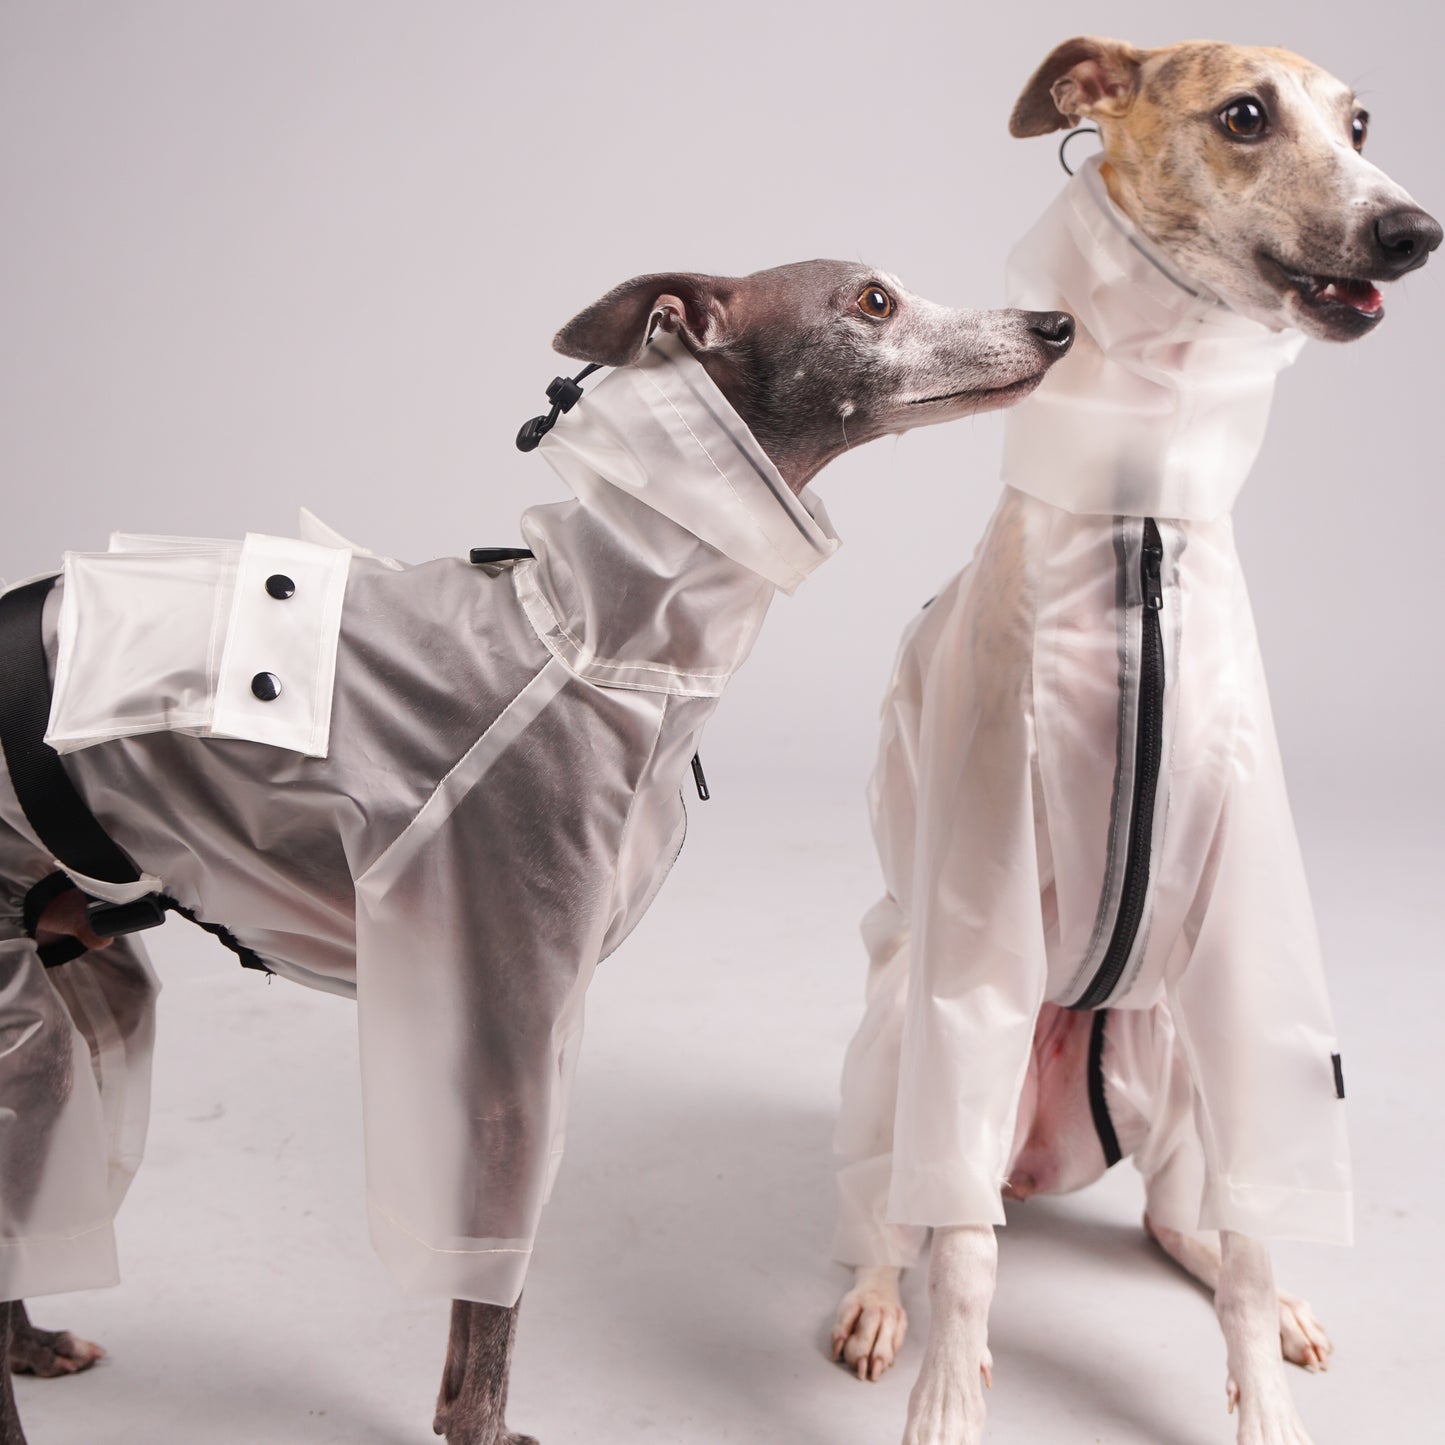 Raincoat for dogs. Luxury clothing for Italian Greyhounds and Whippets.